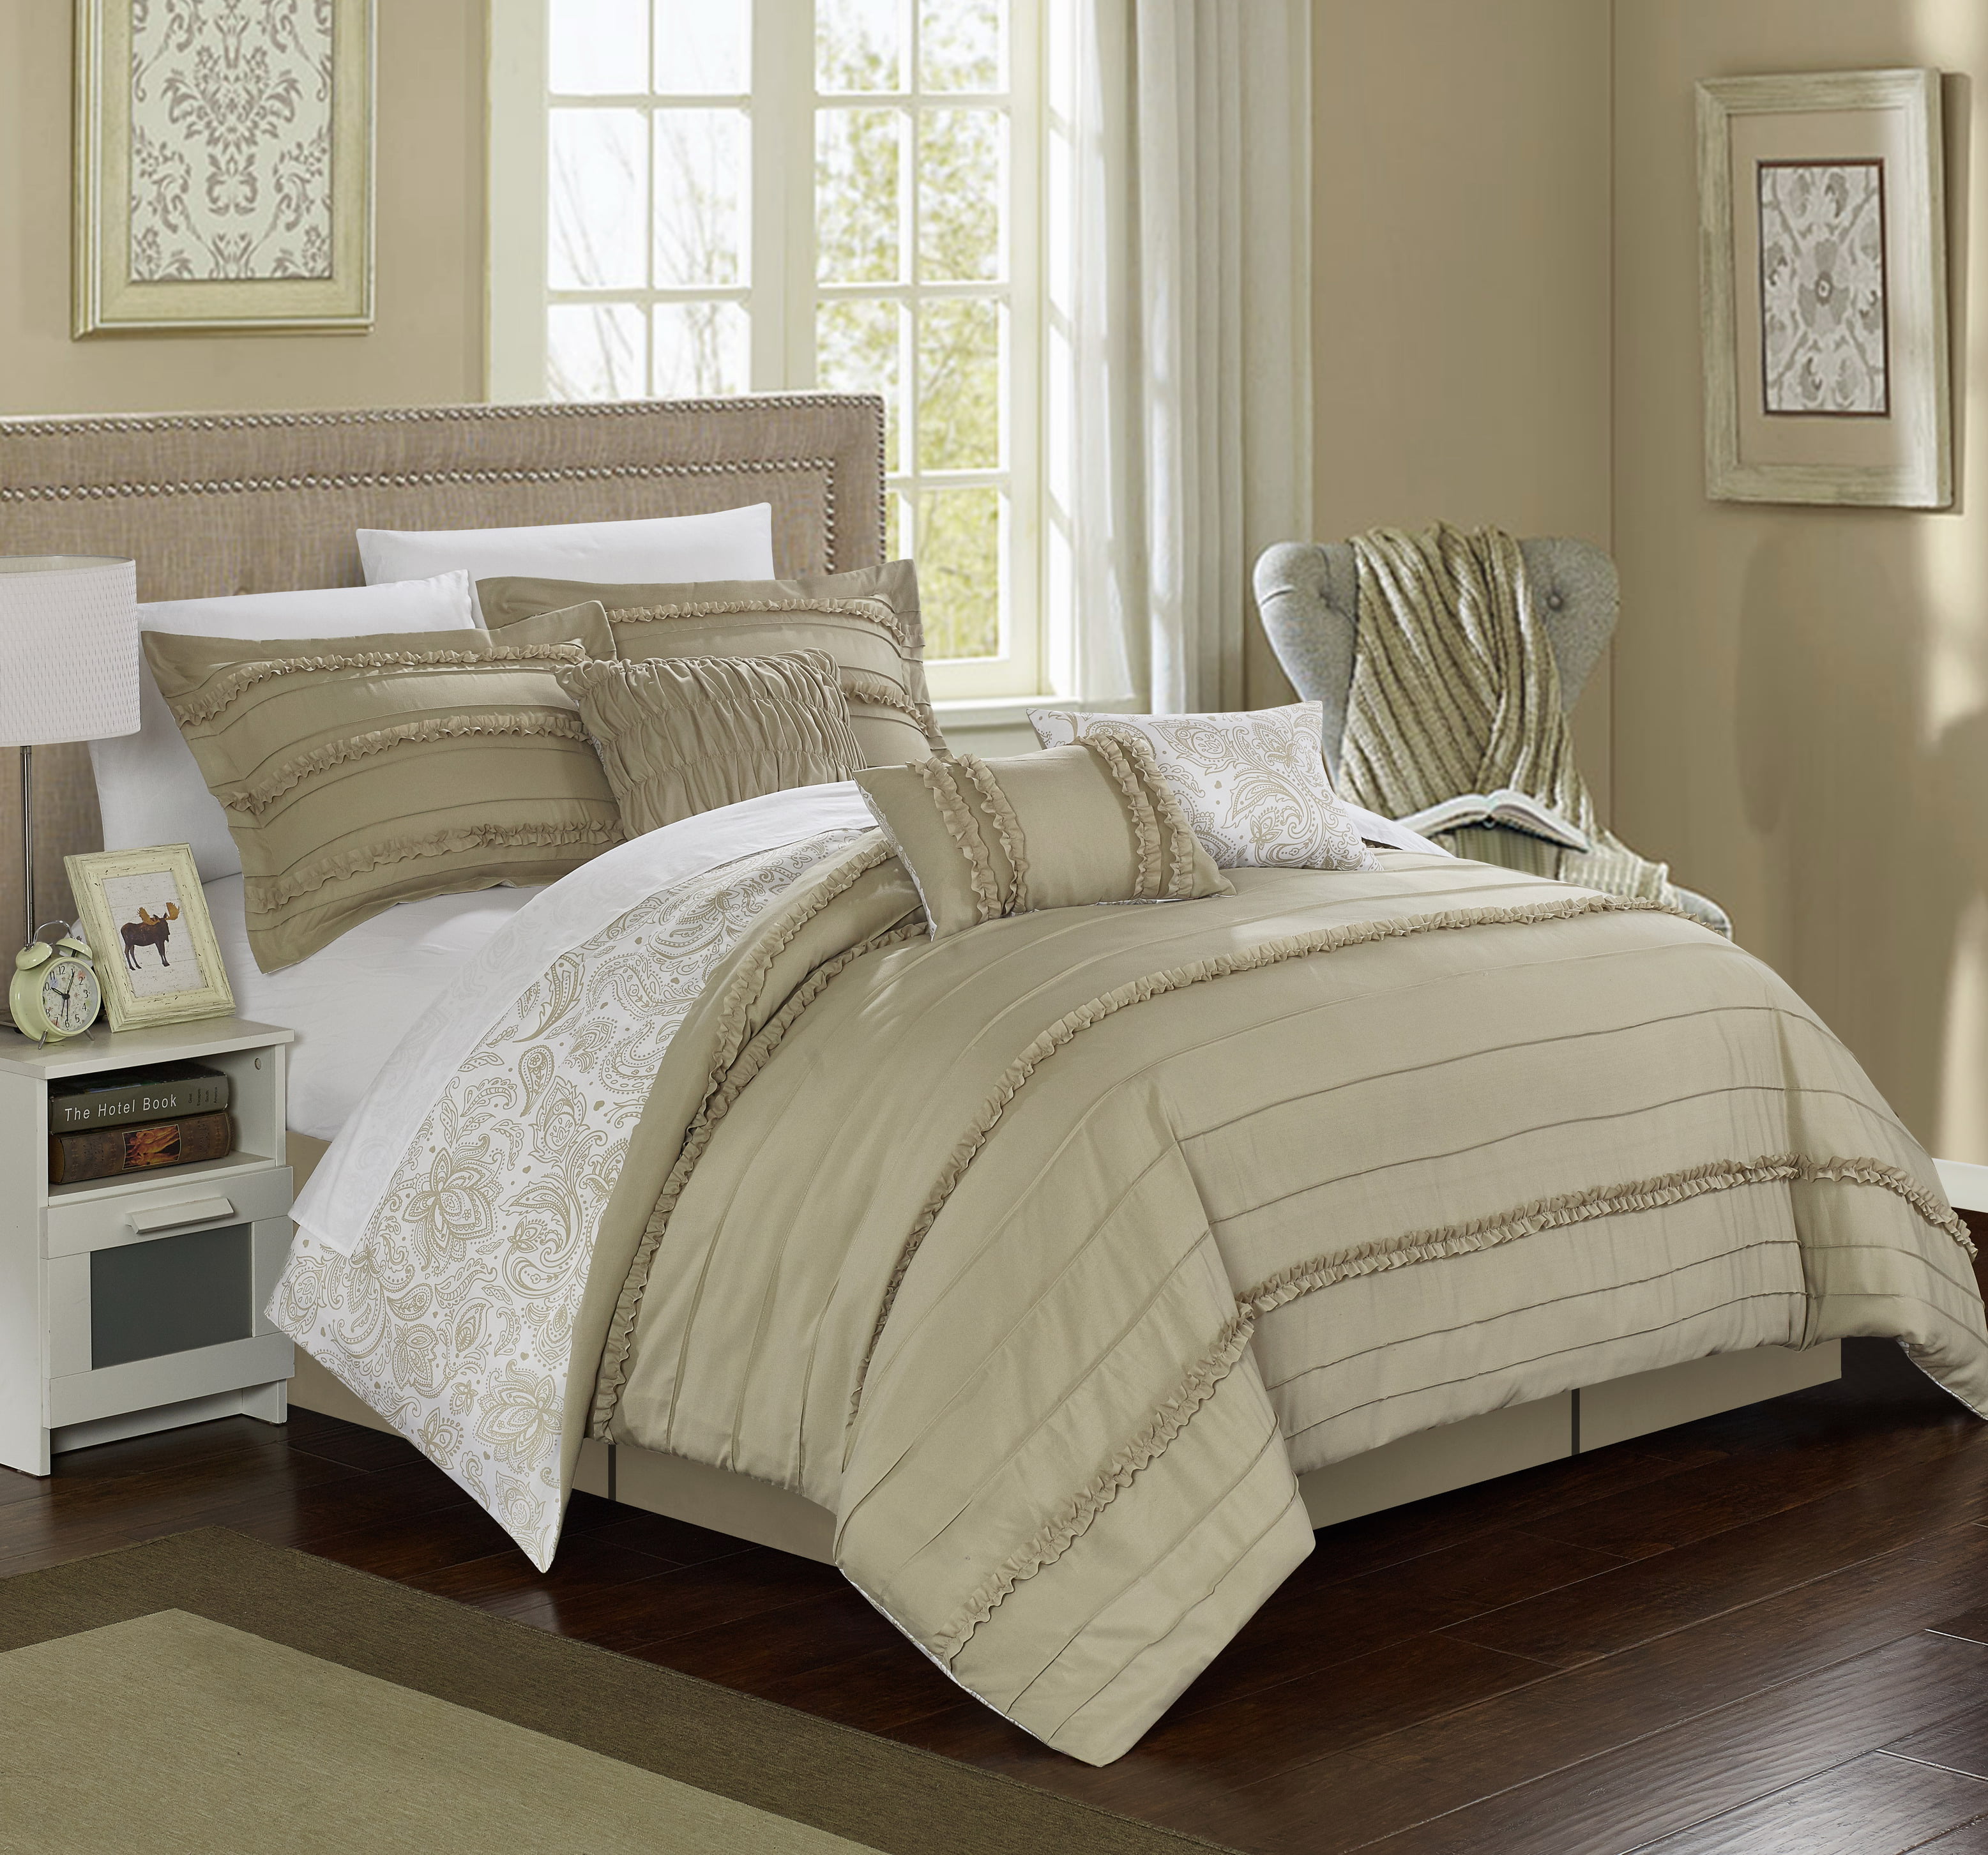 StyleWell Lane Medallion Twin/Twin XL Bed in a Bag Comforter Set with  Sheets and Decorative Pillows YSH-HW-831-1 - The Home Depot